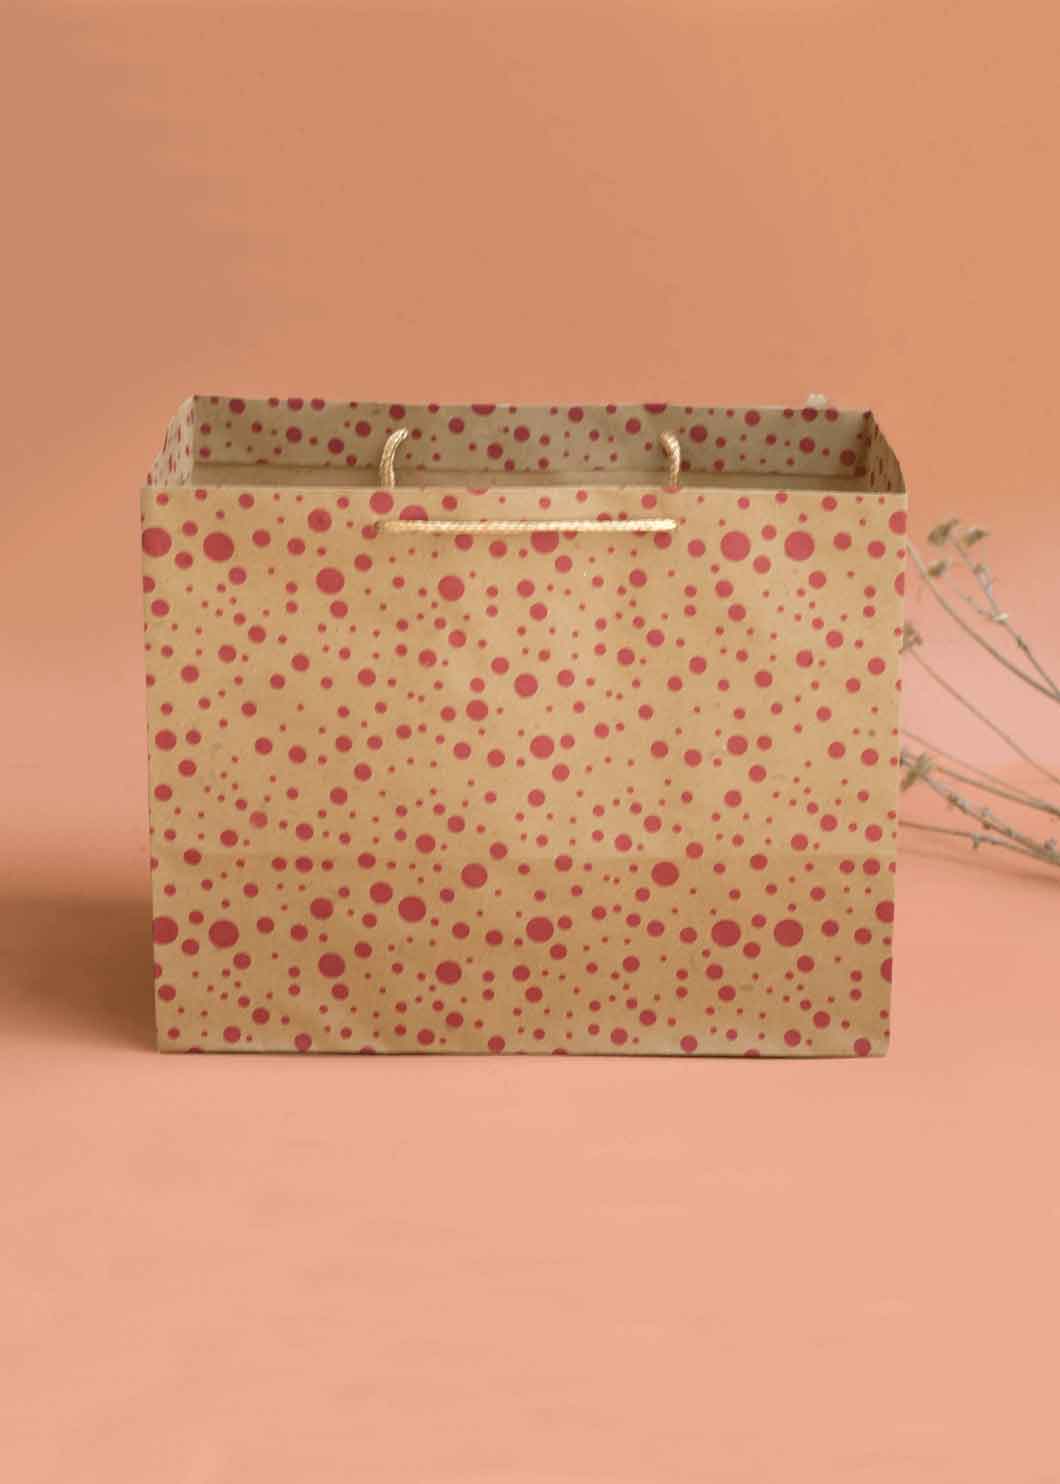 Craft Dotted Pattern Paper Bag - Dotted Print Design Paper Bag for Multipurpose Packing